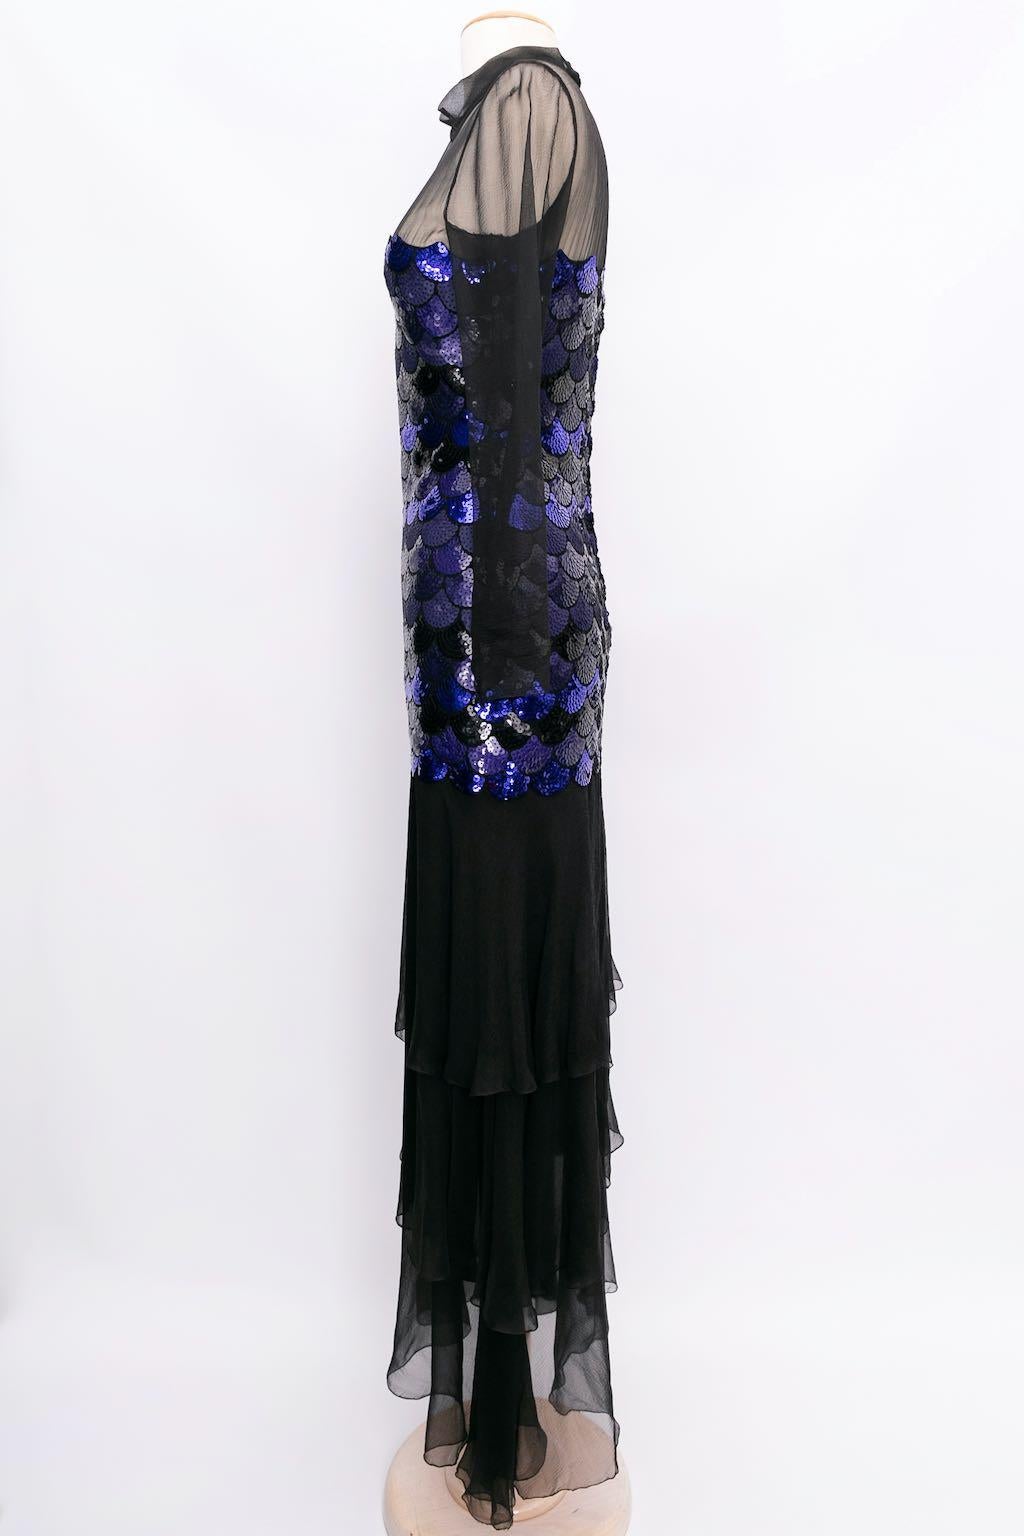 Azzaro (Made in France) Dress in silk chiffon embroidered with sequins. No composition or size tag, it fits a size 36FR.

Additional information: 
Dimensions: Shoulders: 36 cm (14.17